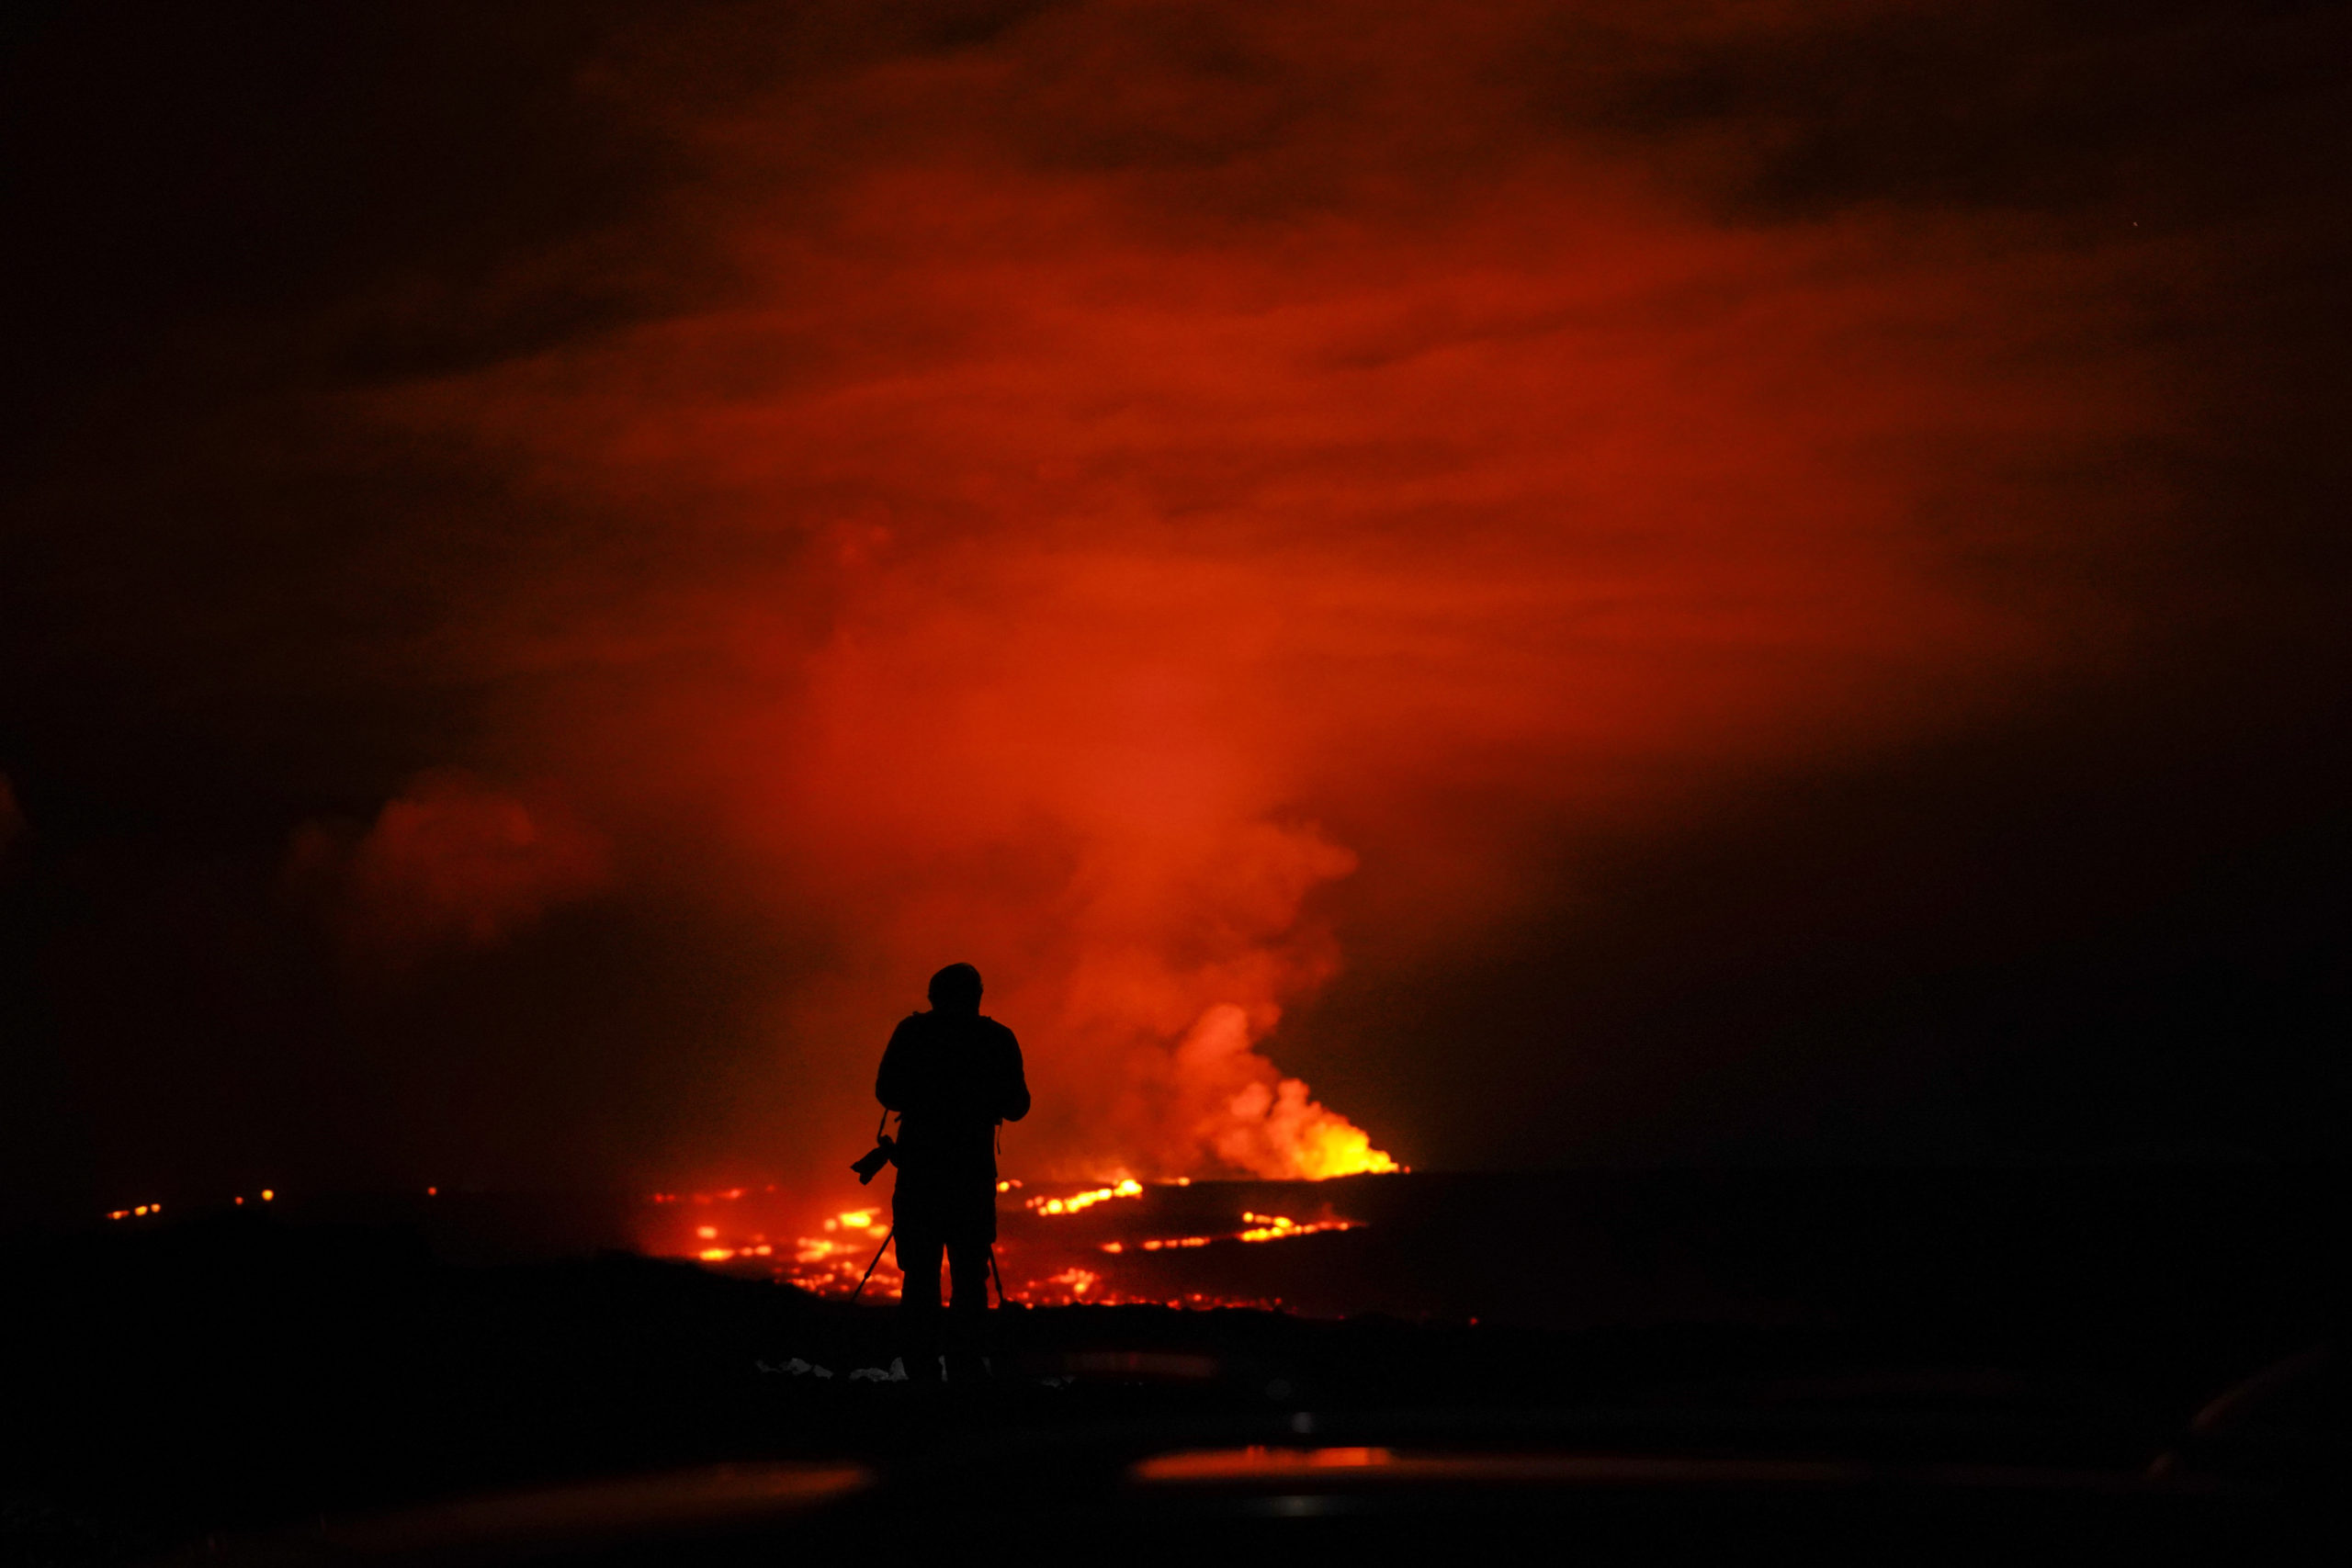 A photographer takes pictures of the erupting Mauna Loa volcano on Wednesday near Hilo, Hawaii.